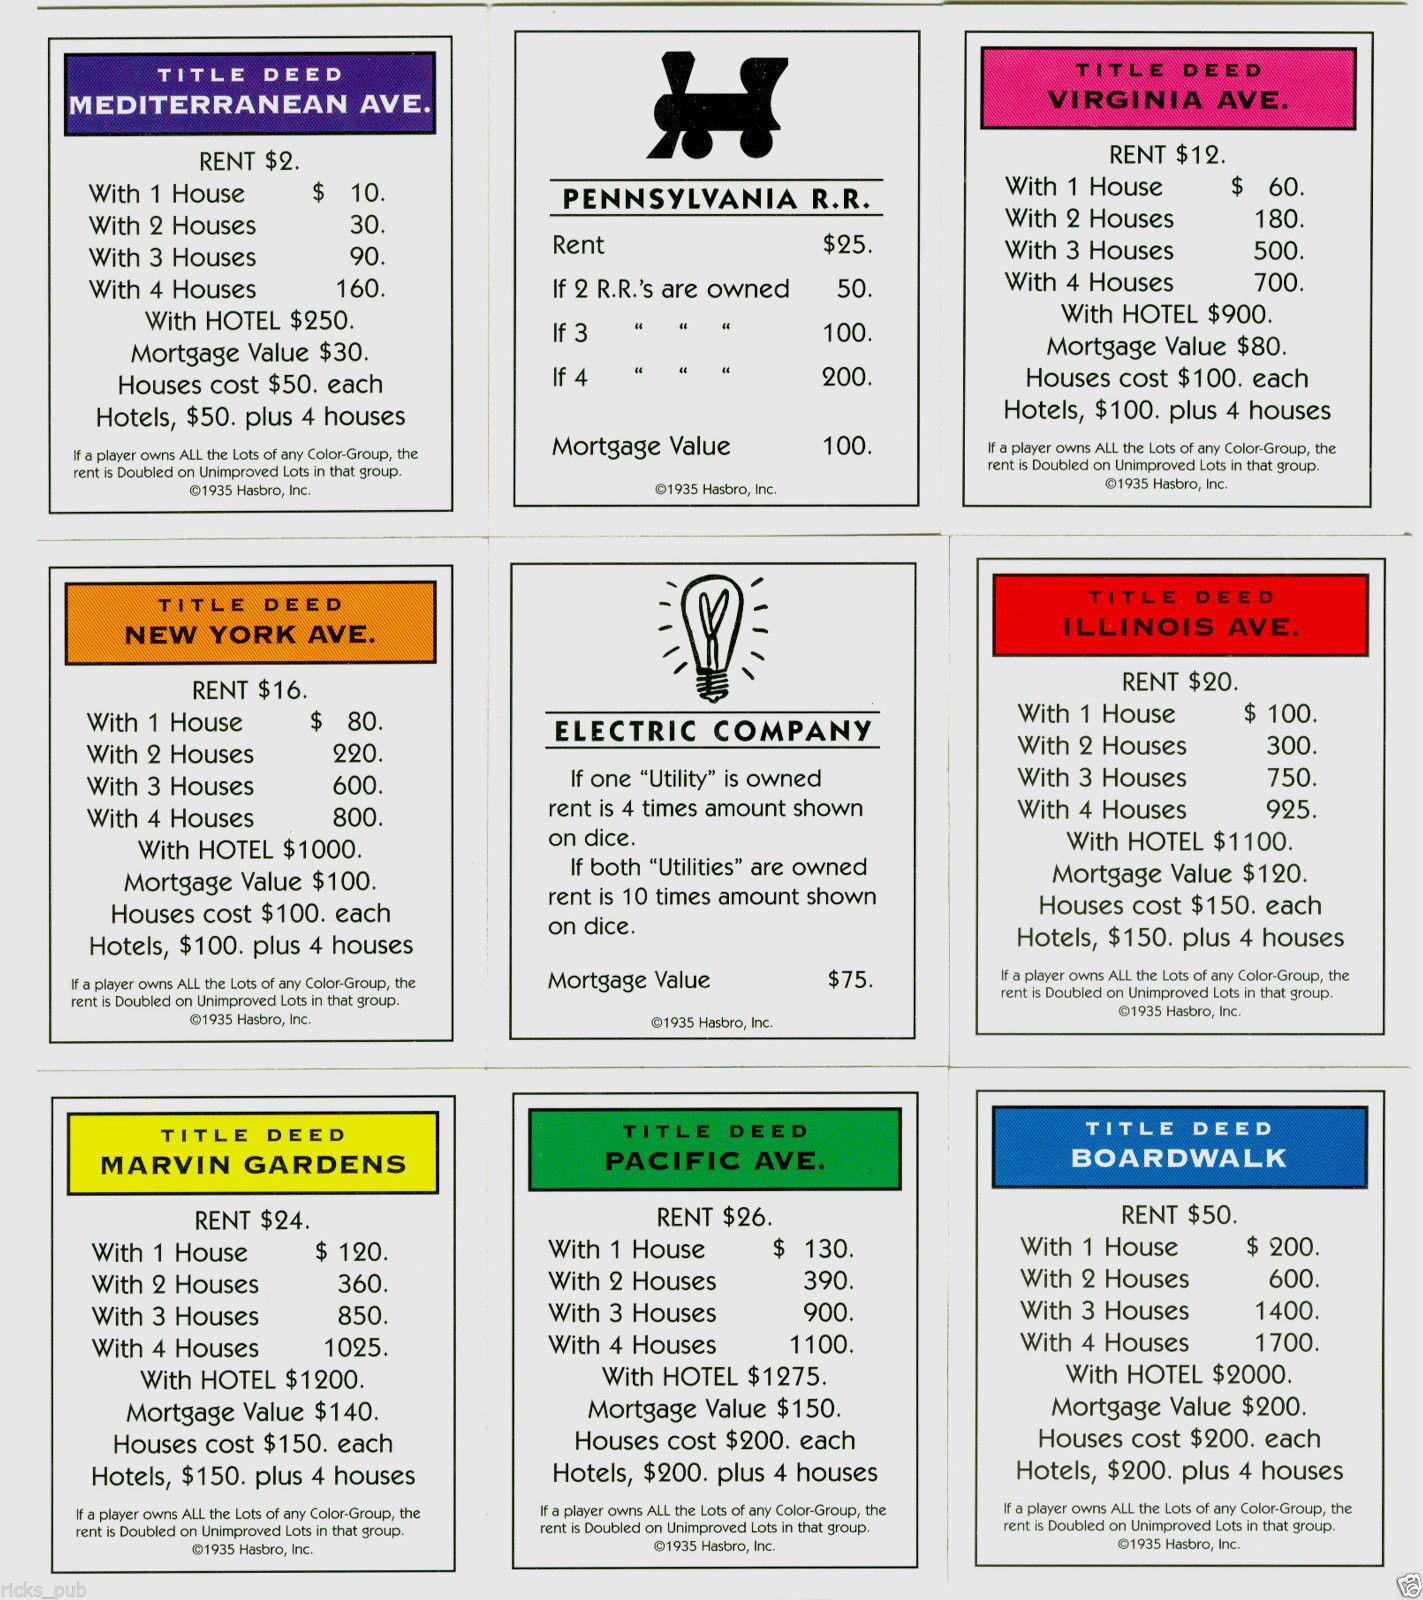 8A1C008 Monopoly Chance Card Template | Wiring Resources For Monopoly Chance Cards Template